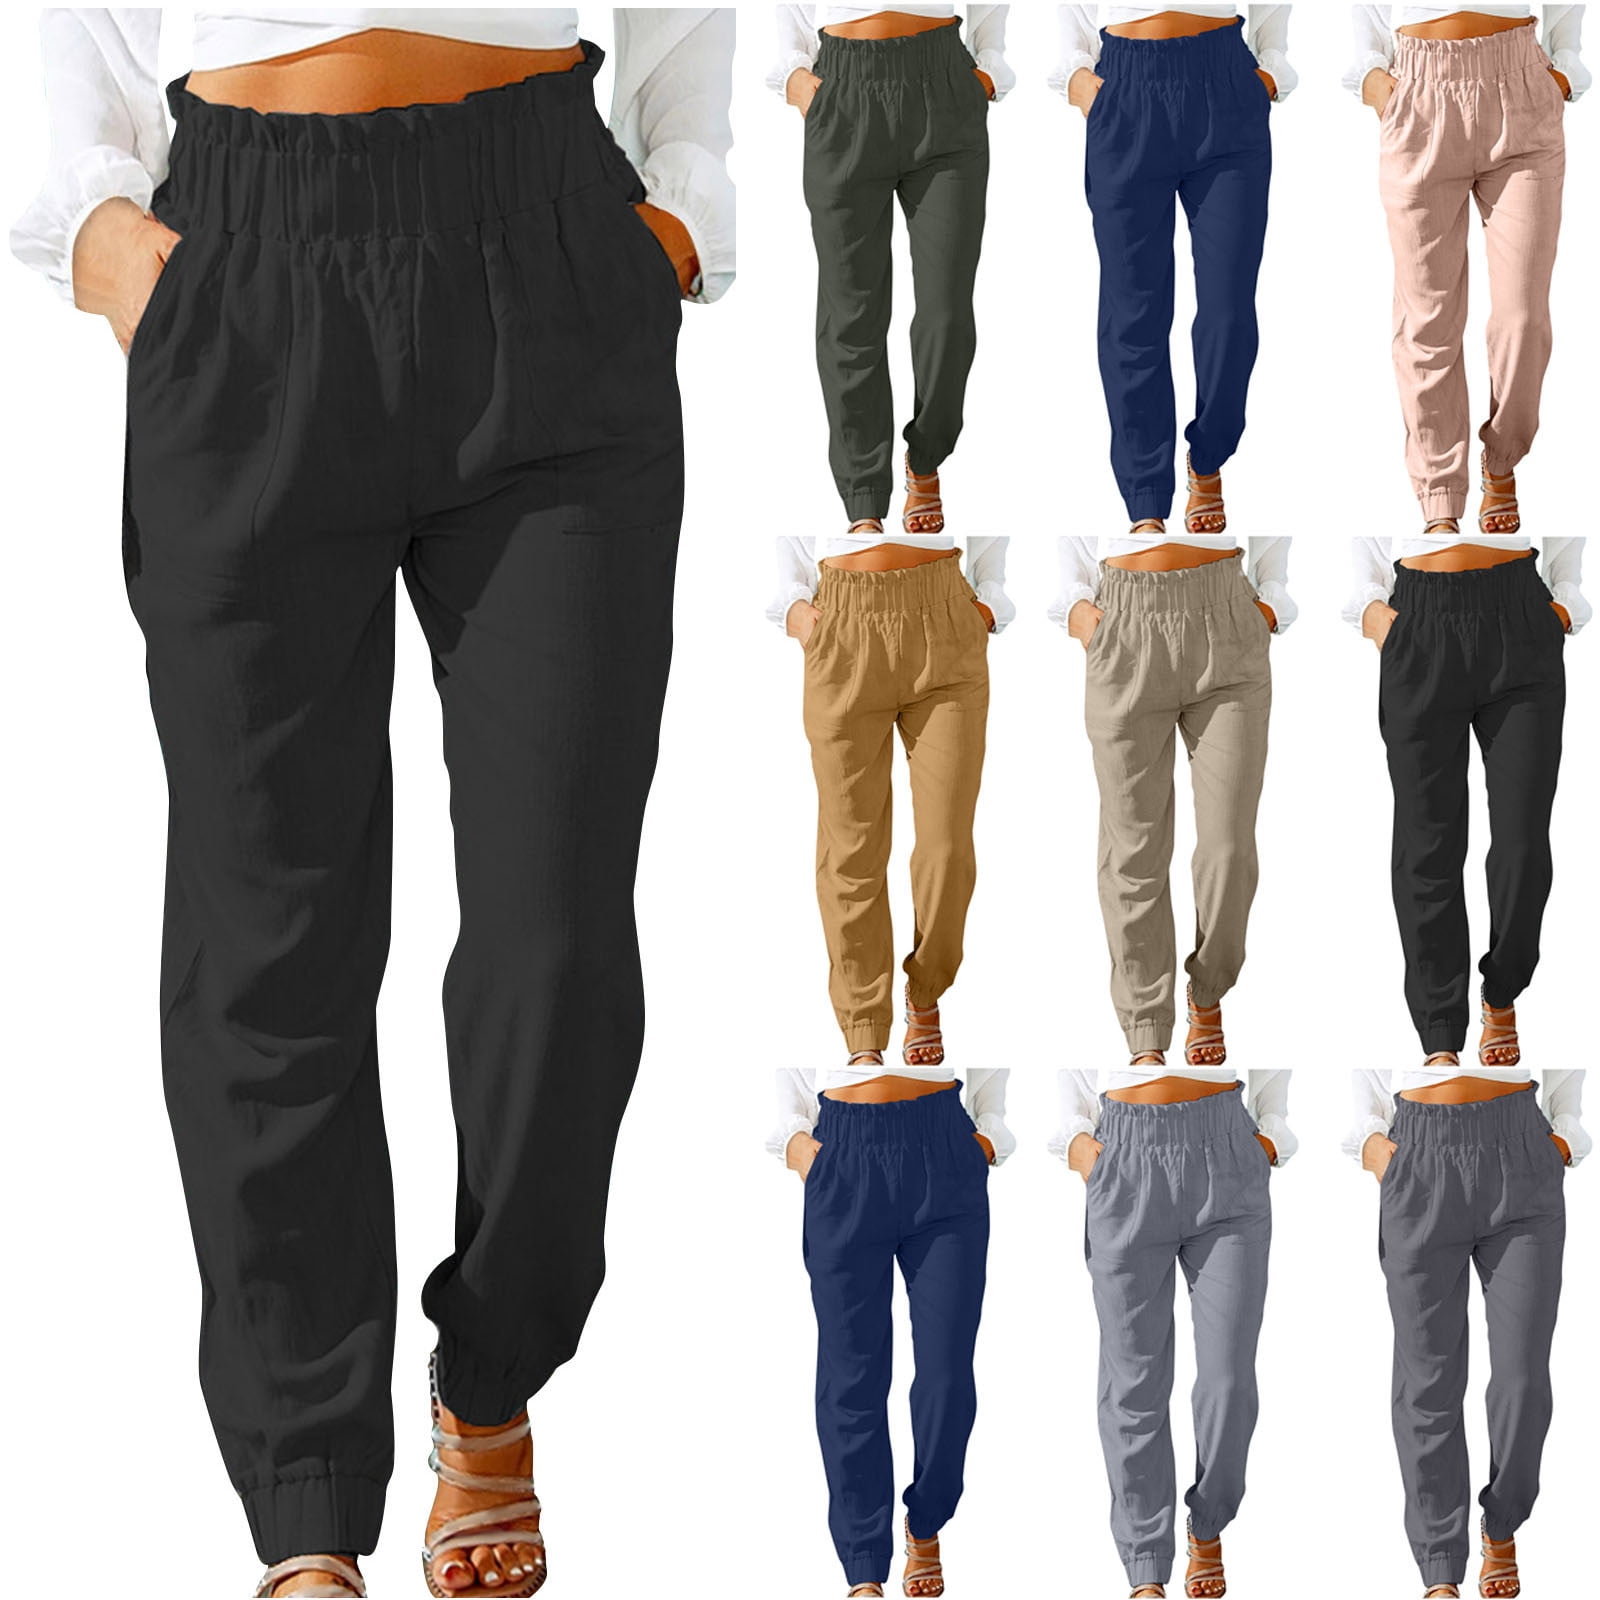 Linen Pants Women Summer Fashion Casual Loose Plus Size Cotton And ...